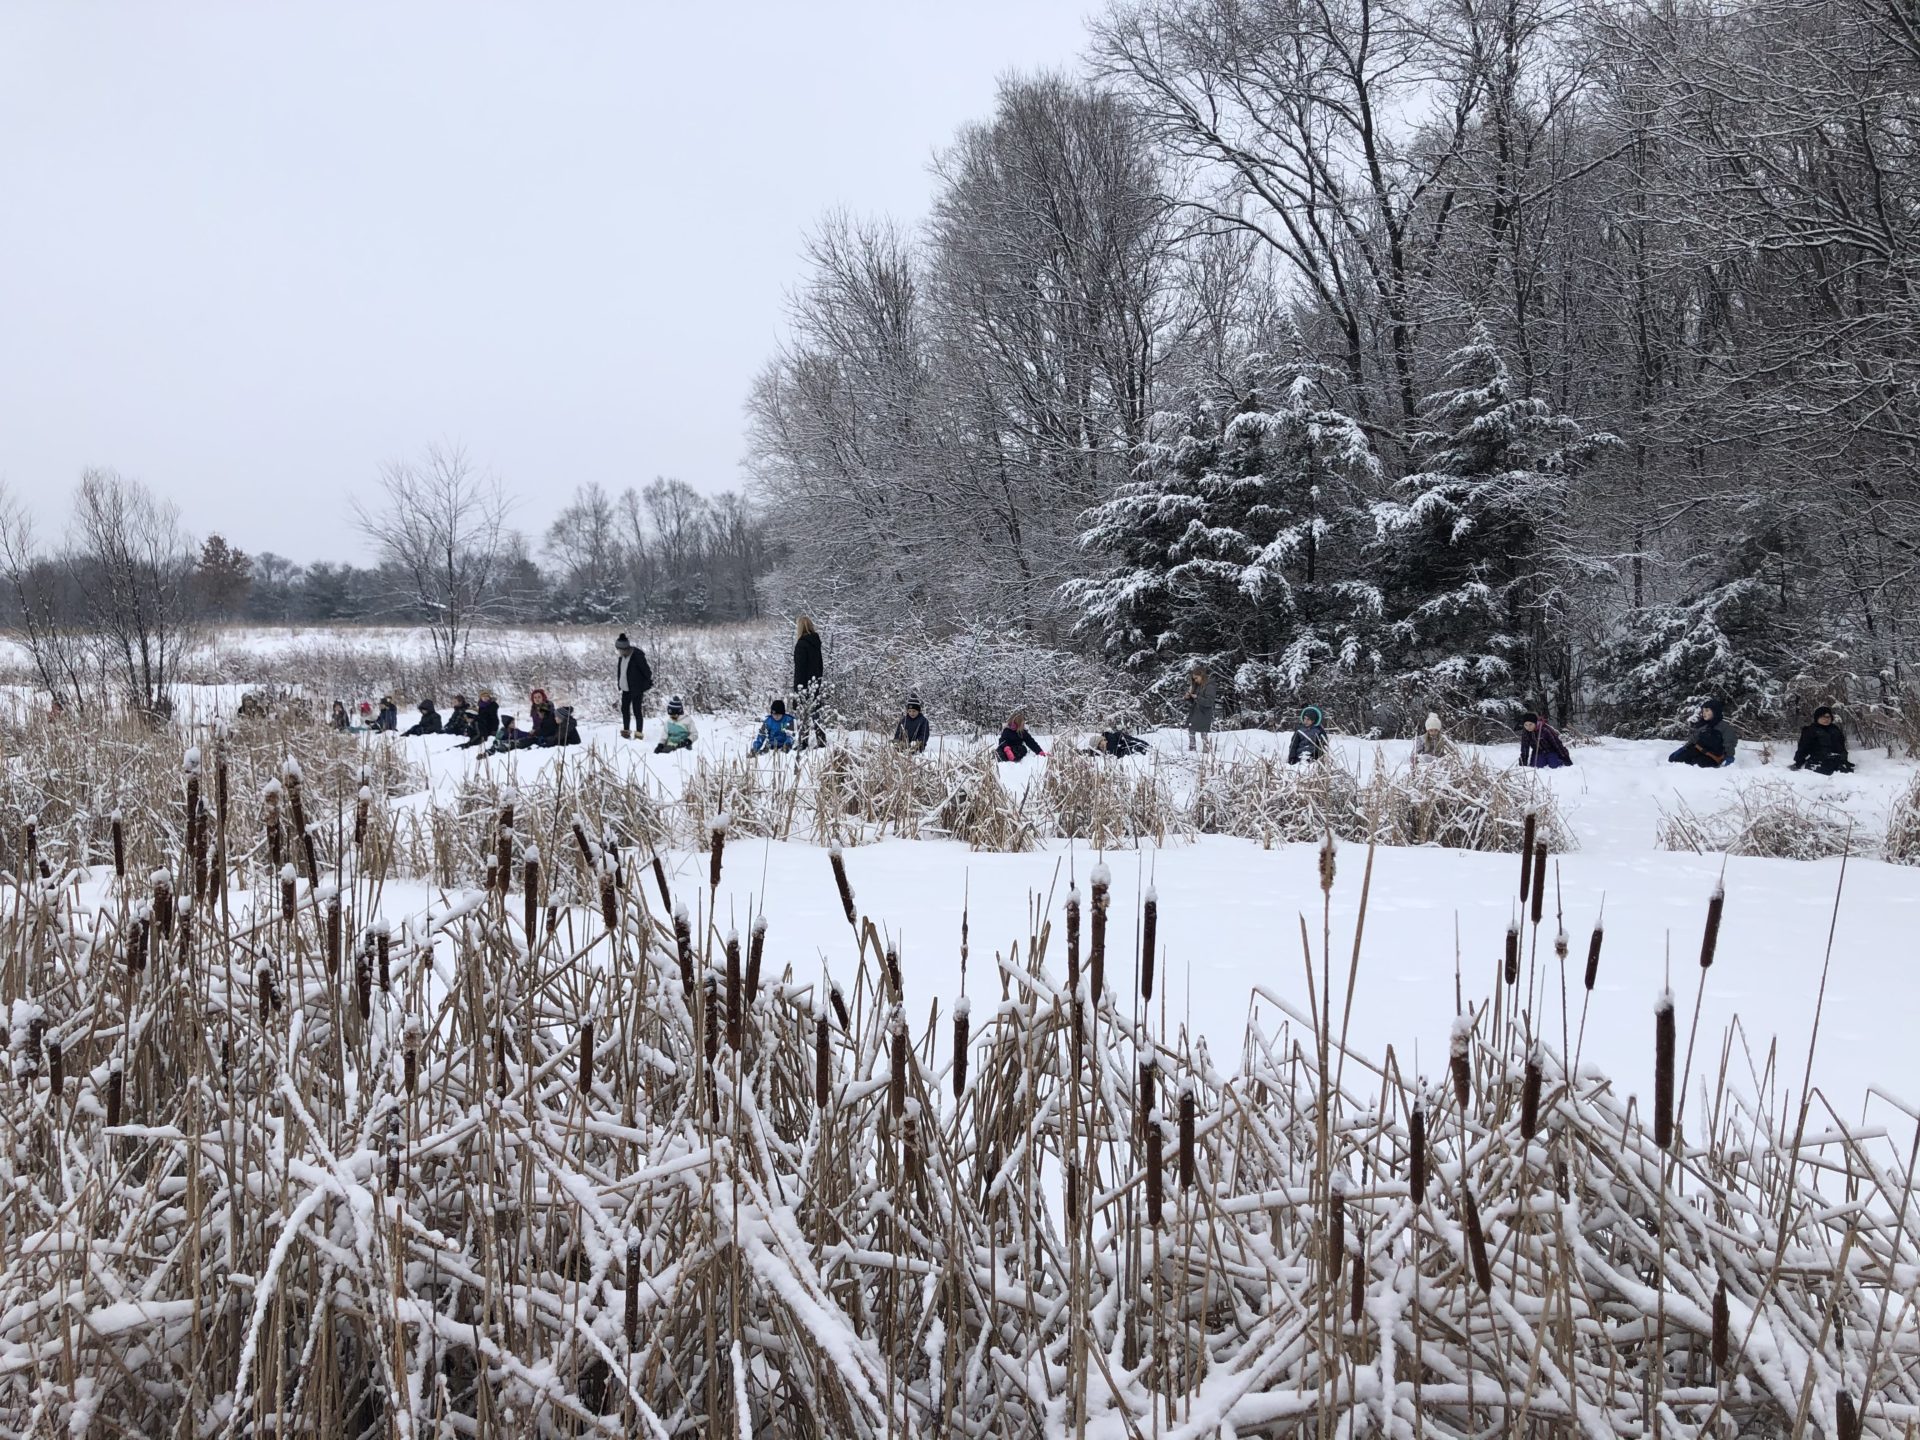 Students seated in the snow around the frozen pond.